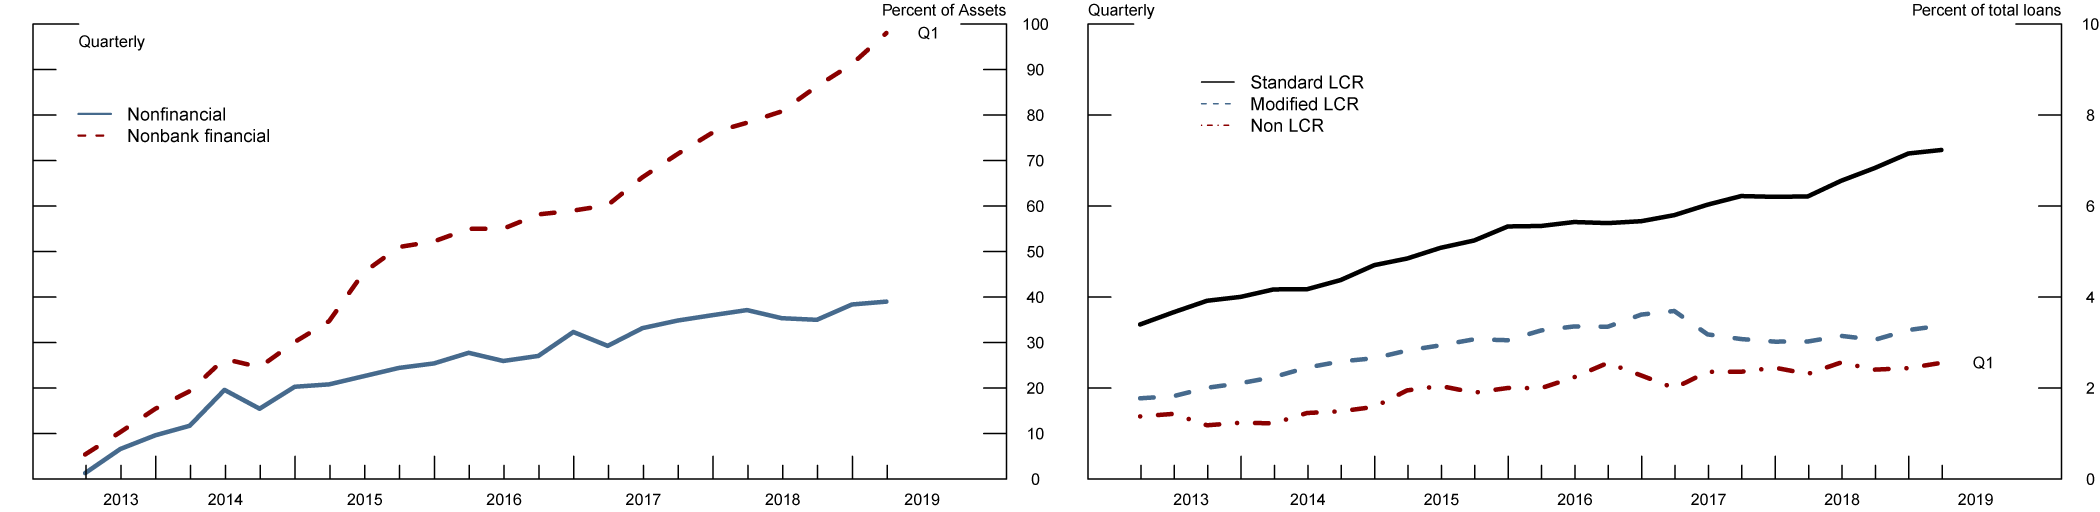 Figure 1A: Cumulative growth in credit lines to the corporate sector. Figure 1B: Unused credit commitments to nonbank financial institutions as percent of total assets. See accessible link for data.